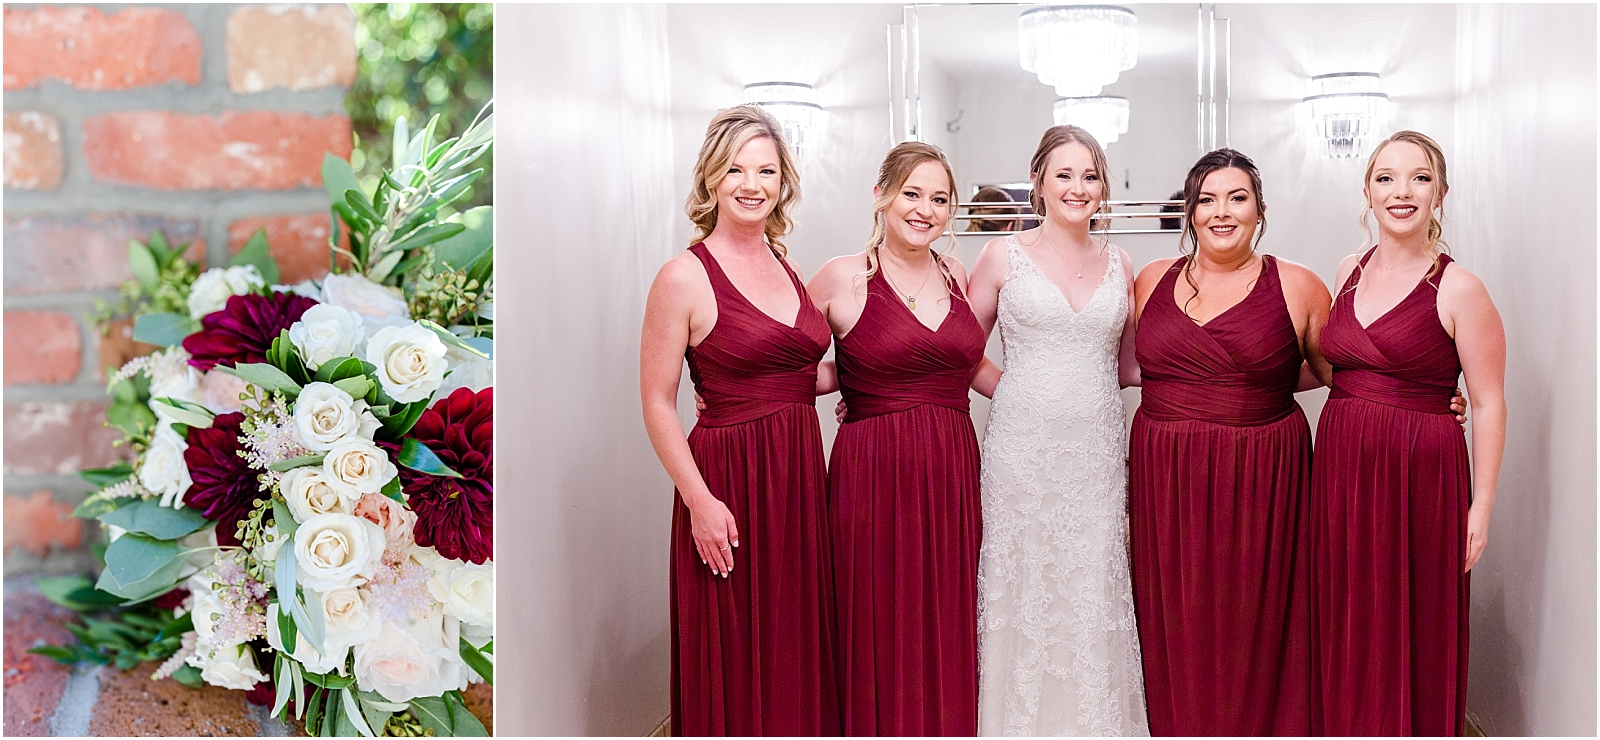 Bride and bridesmaids portraits at Palm Event Center in Pleasanton, CA. Bridal bouquet with burgundy dahlias and white roses.